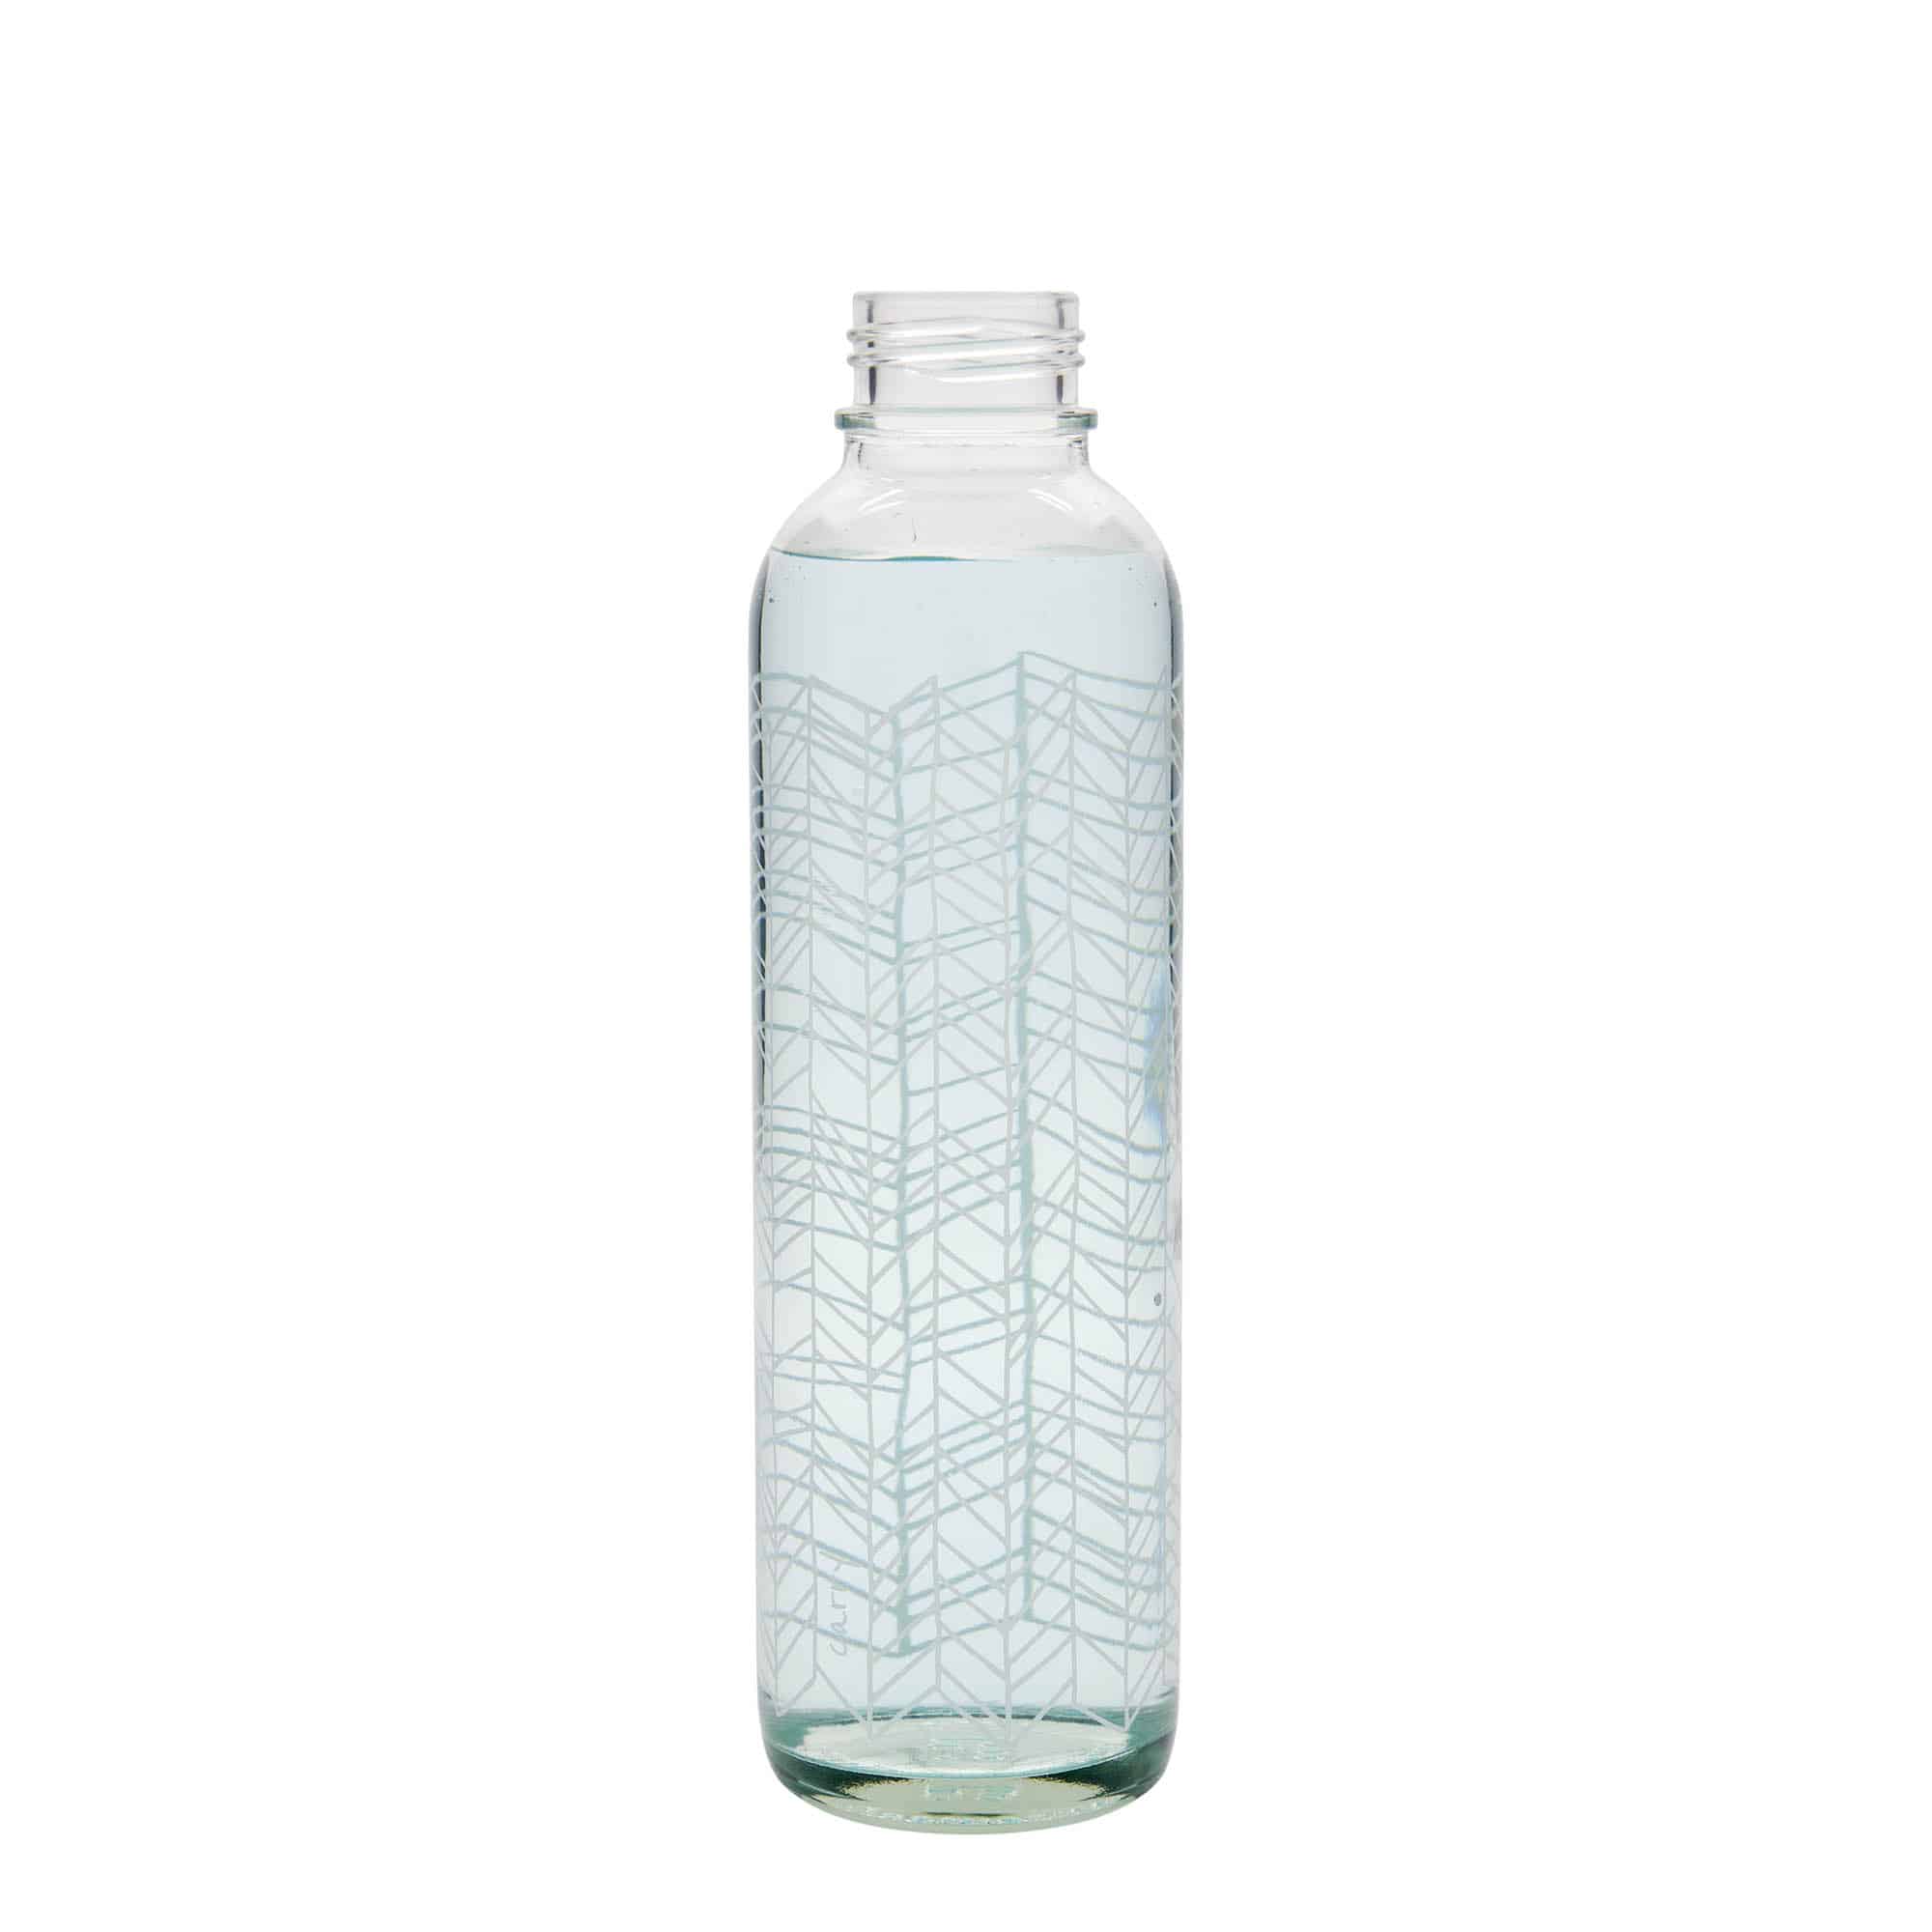 700 ml water bottle ‘CARRY Bottle’, print: Structure of Life, closure: screw cap